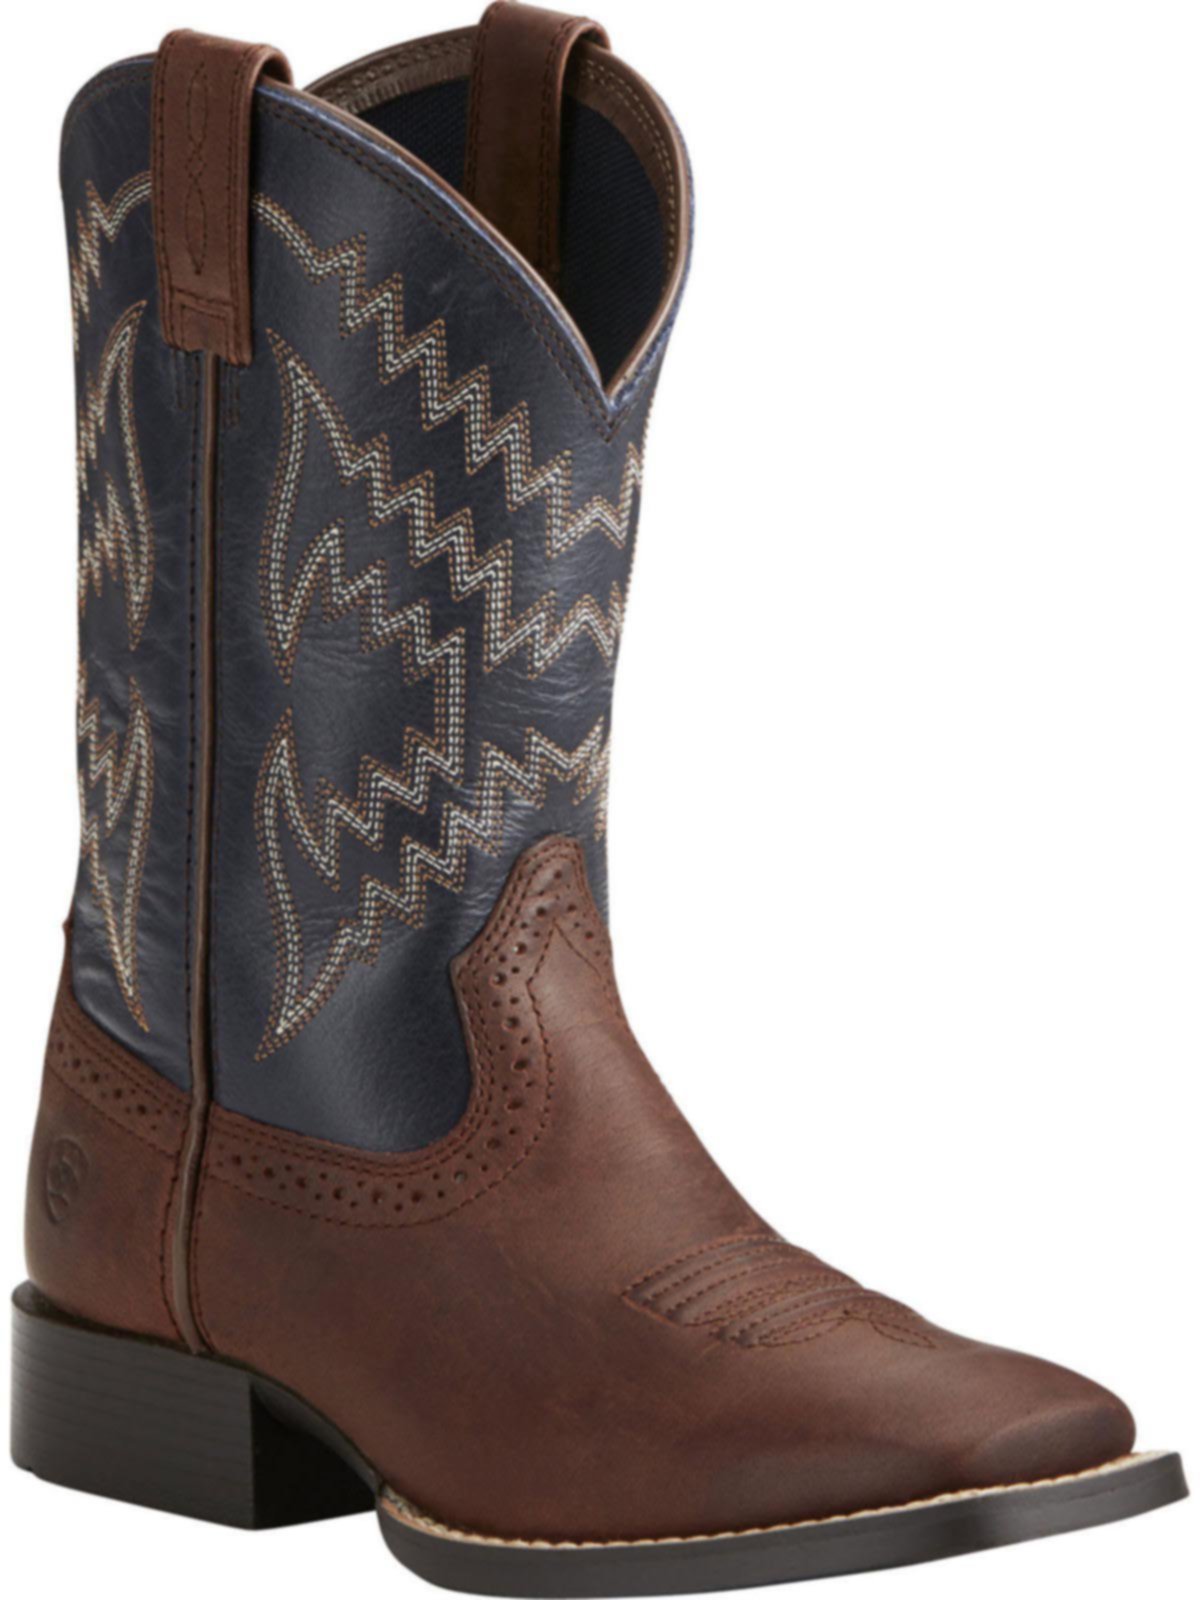 Shop Ariat Kids Tycoon Western Boot 10021591 | Save 25% + Free Shipping ...